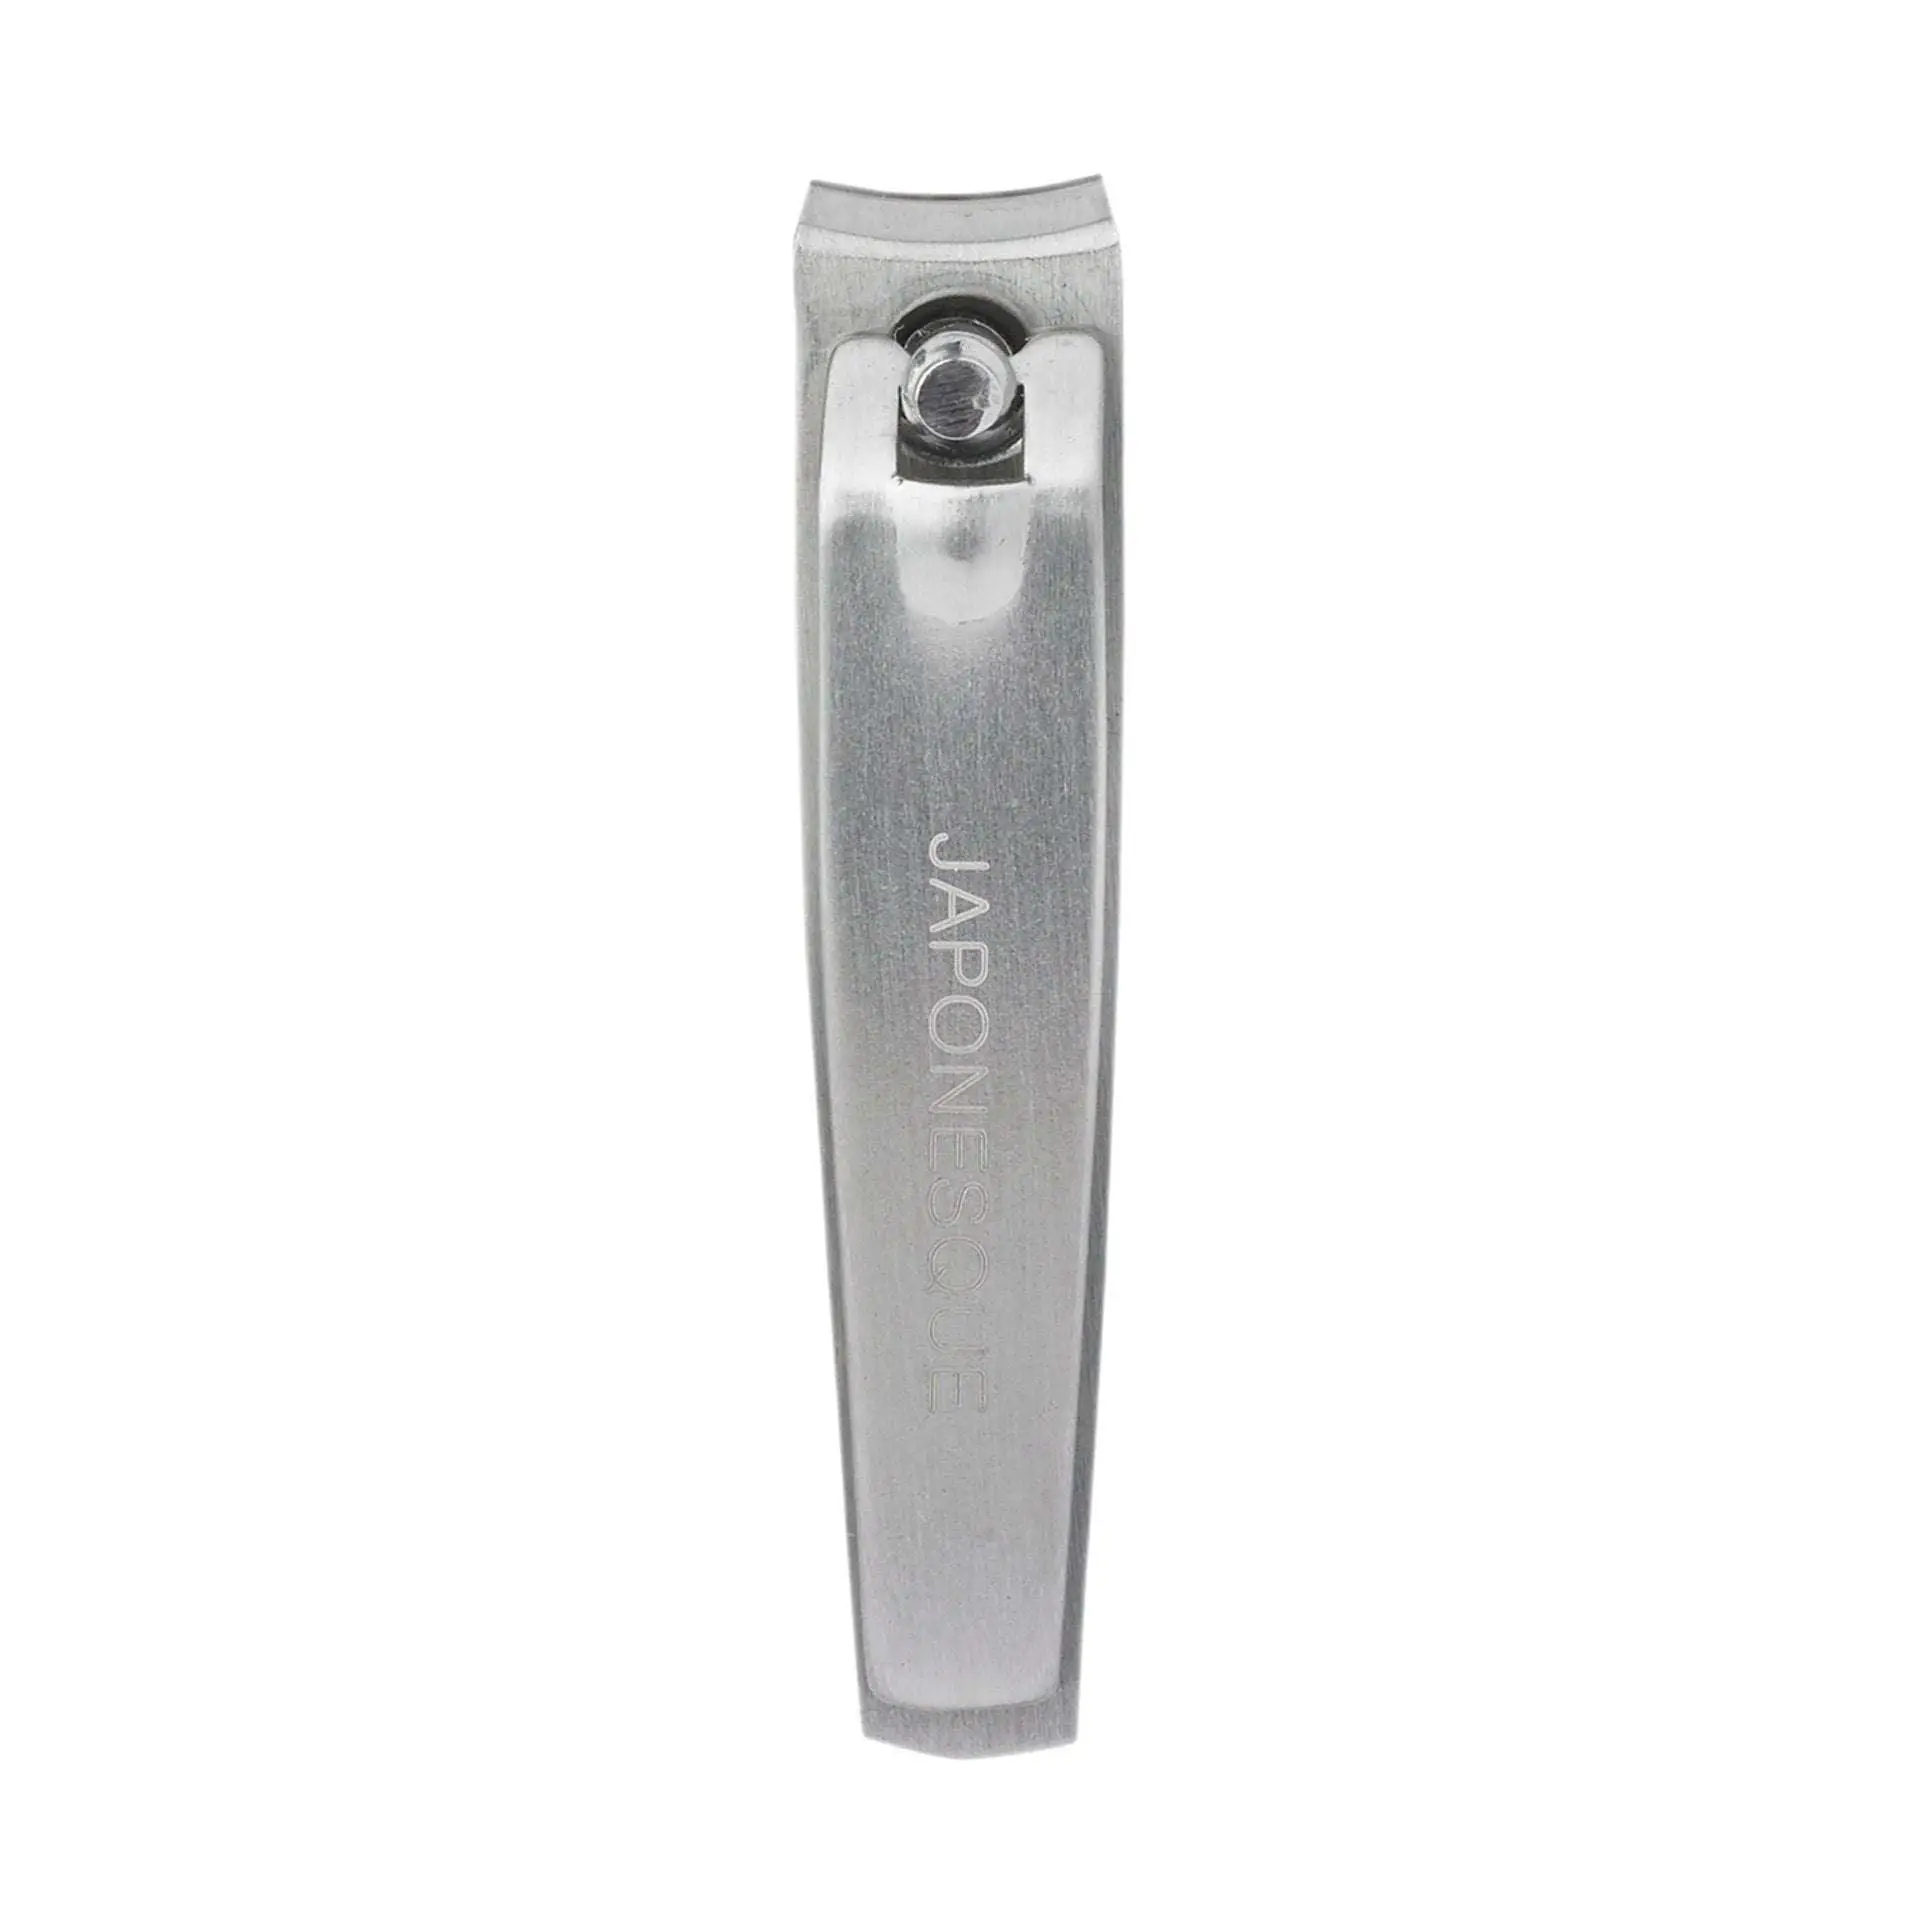 Please where can I buy a nail clipper from? : wolverhampton